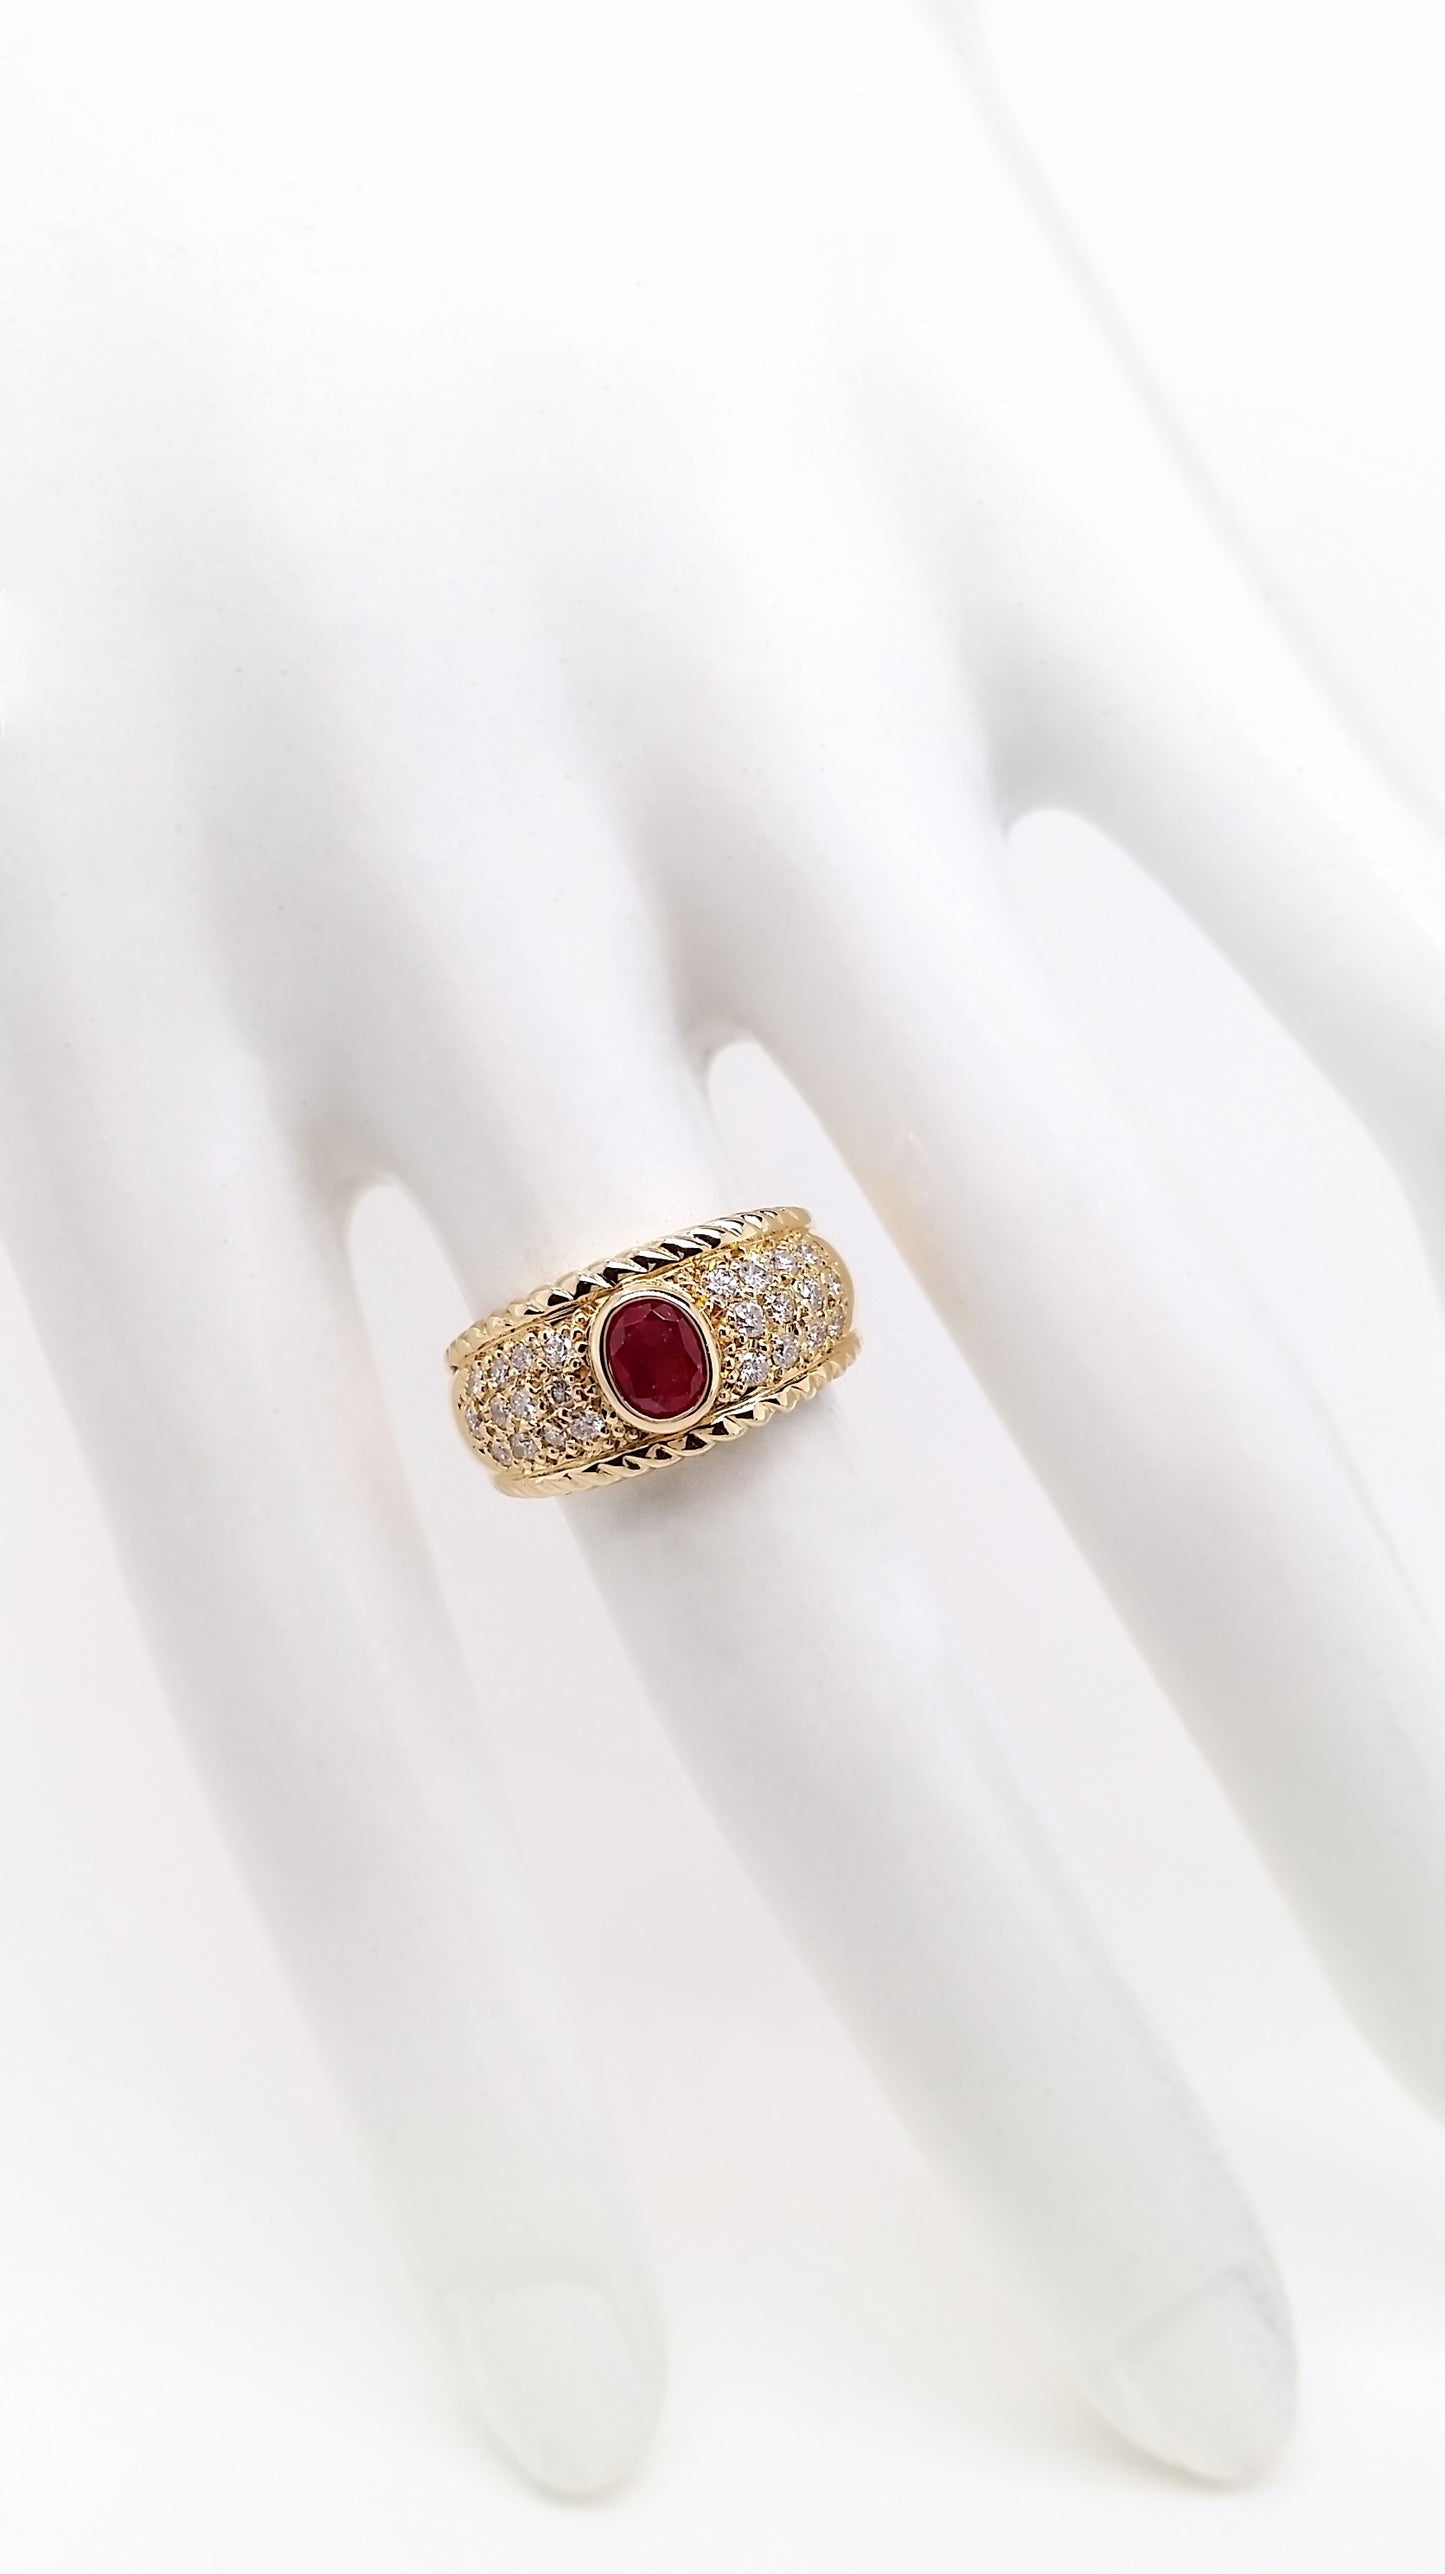 0.98ct NATURAL BURMA RUBY accented by 0.39ct NATURAL DIAMONDS set with 18K Yellow Gold Ring - SALE